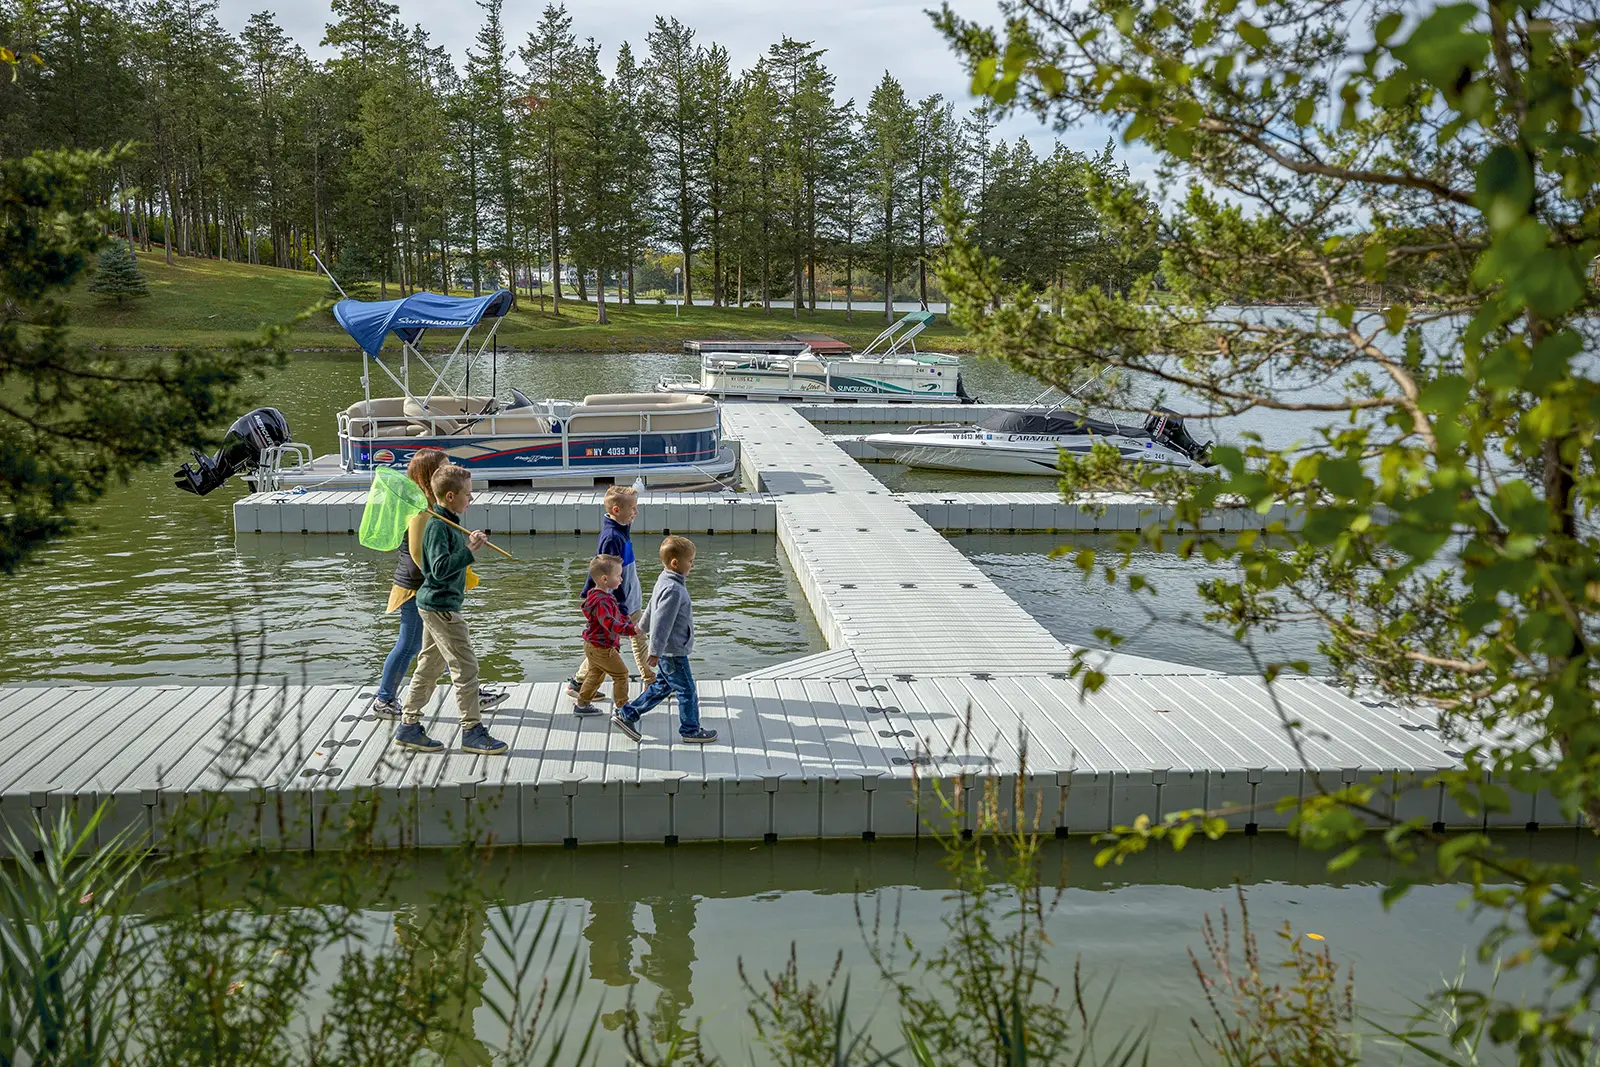 A group of kids walking on the dock with boats parked